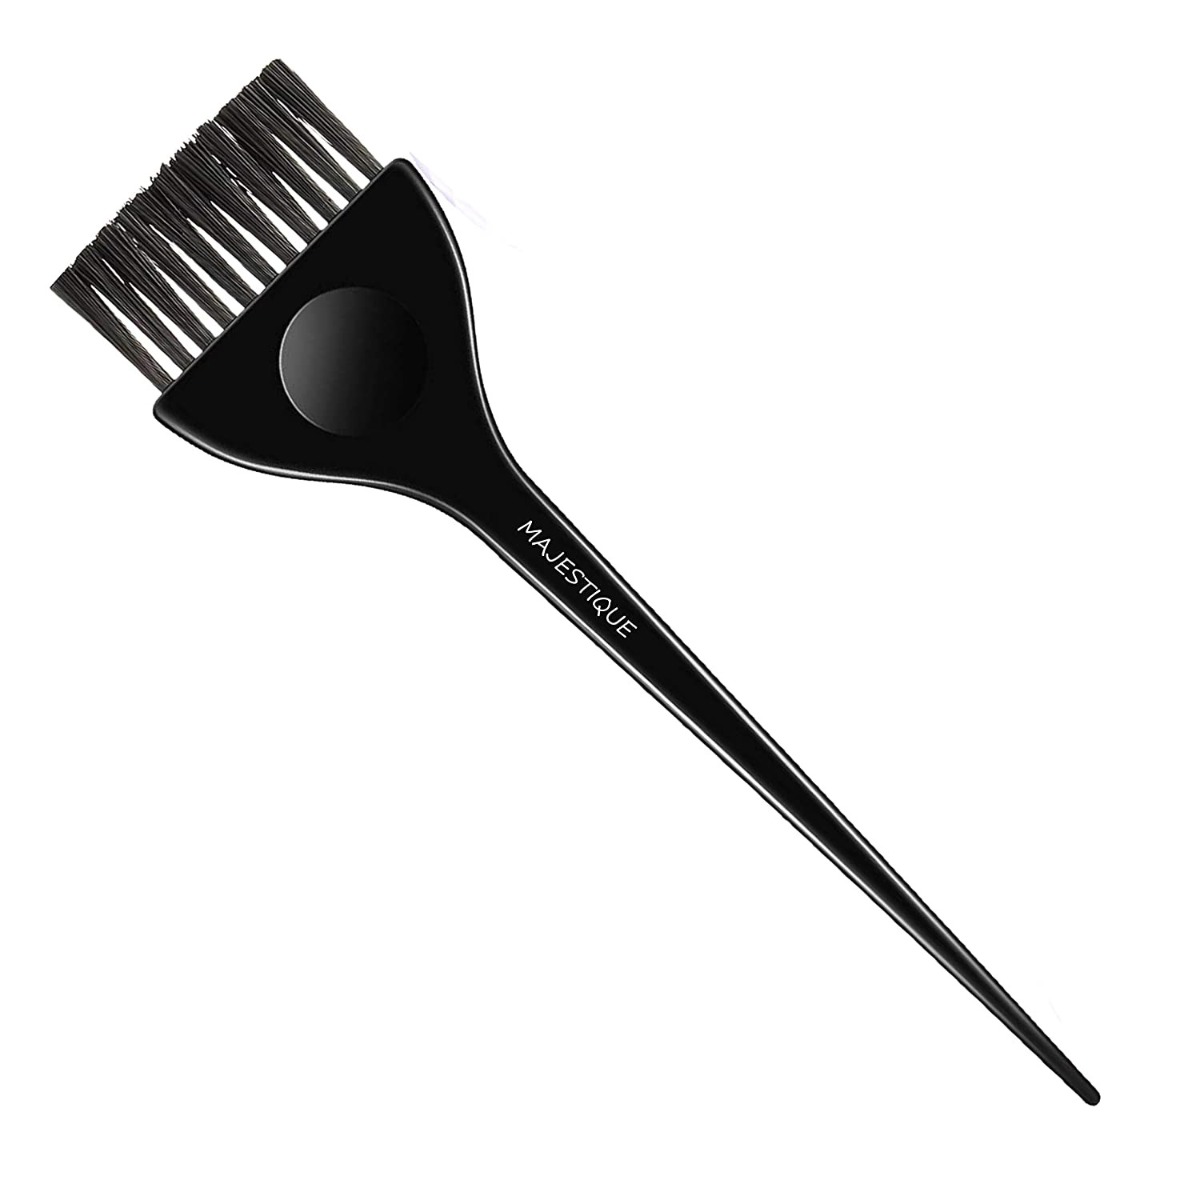 Majestique Hair Dye Coloring Brush - Assorted, 1pc